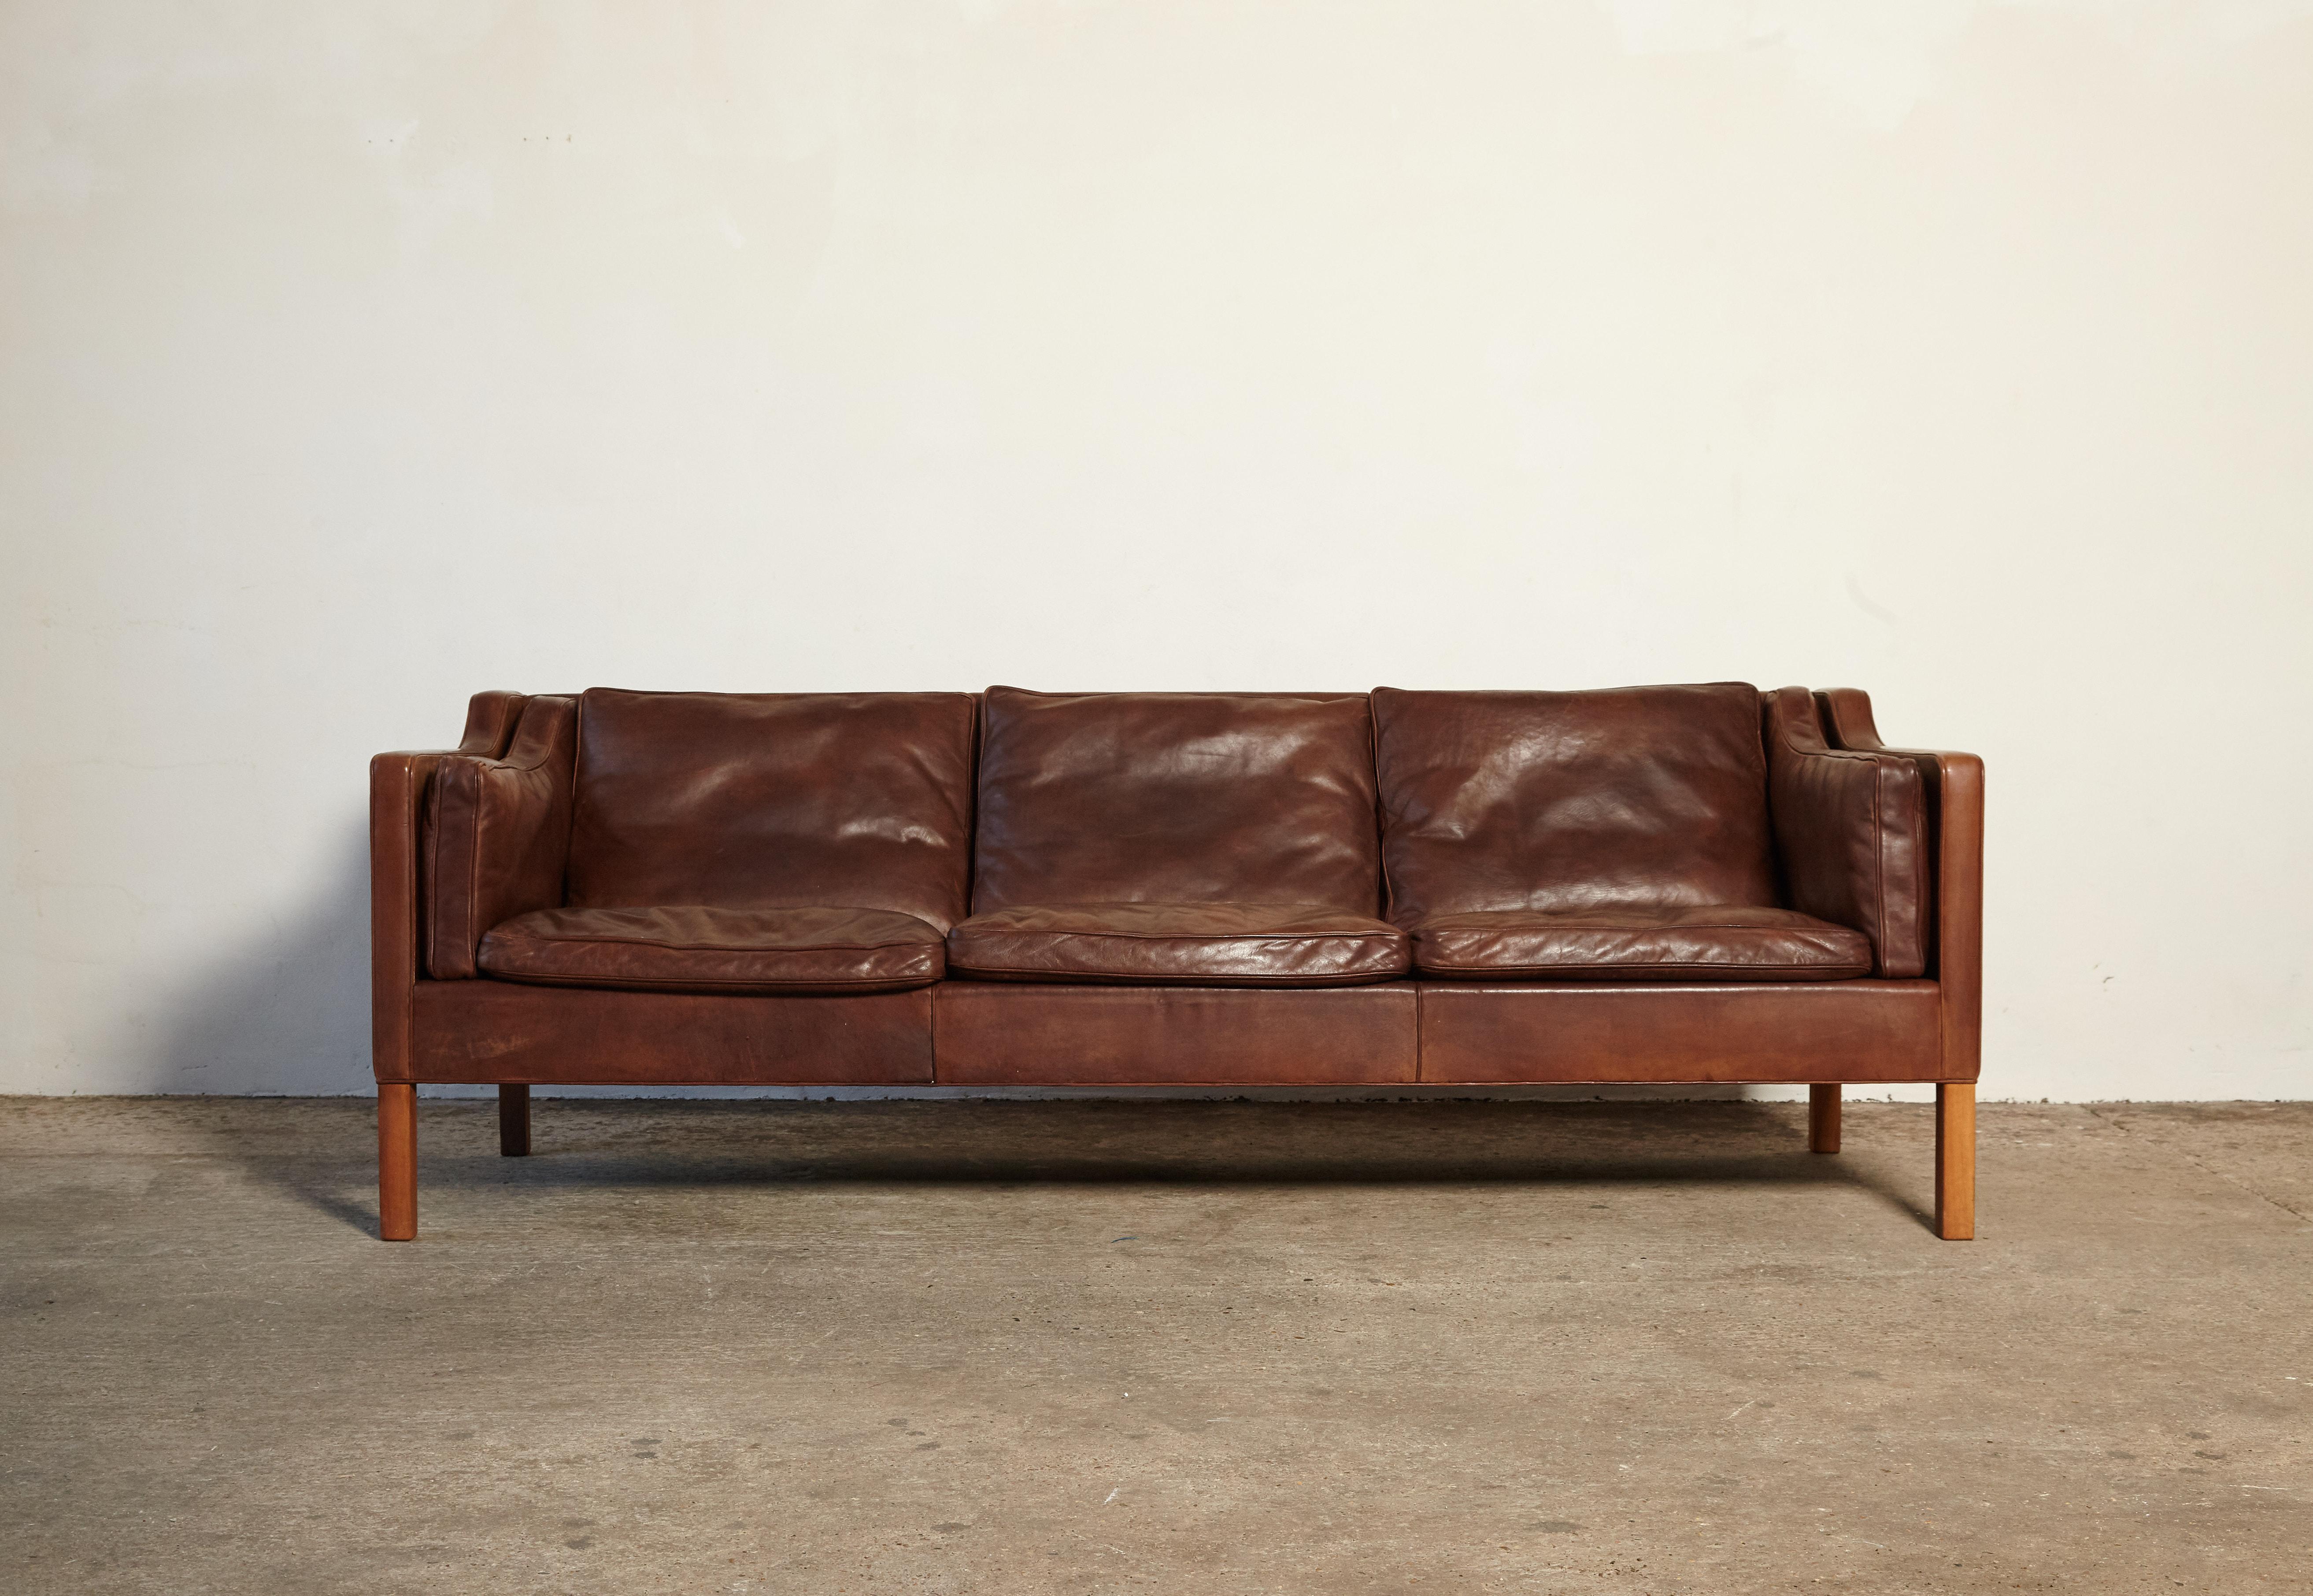 Original three-seat model 2213 sofa designed by Borge Mogensen in 1965 and made by Frederecia, Denmark. In original condition with a some wear and a lovely deep patina.